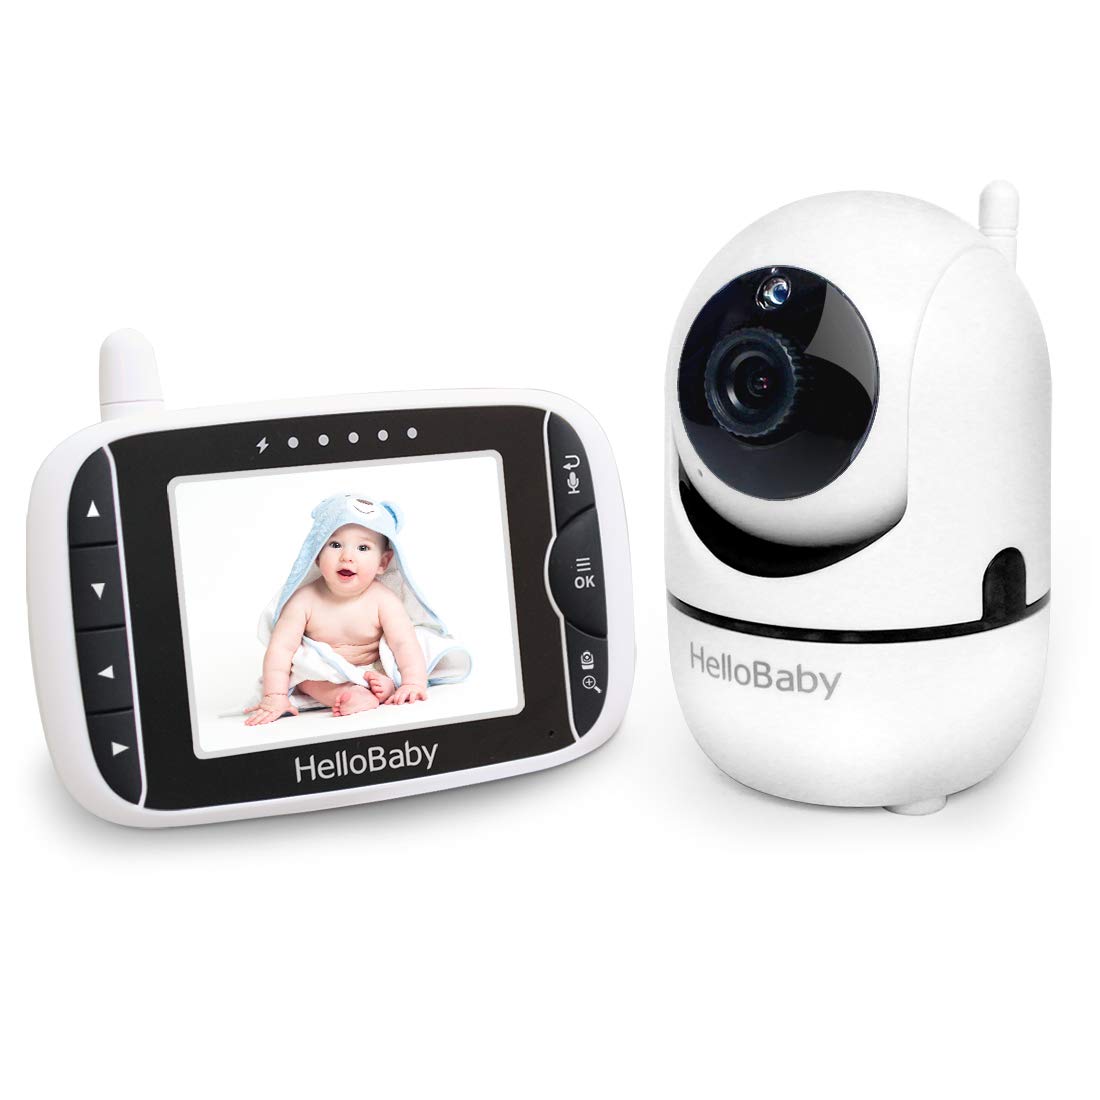 HelloBaby 3.2-Inch Video Baby Monitor